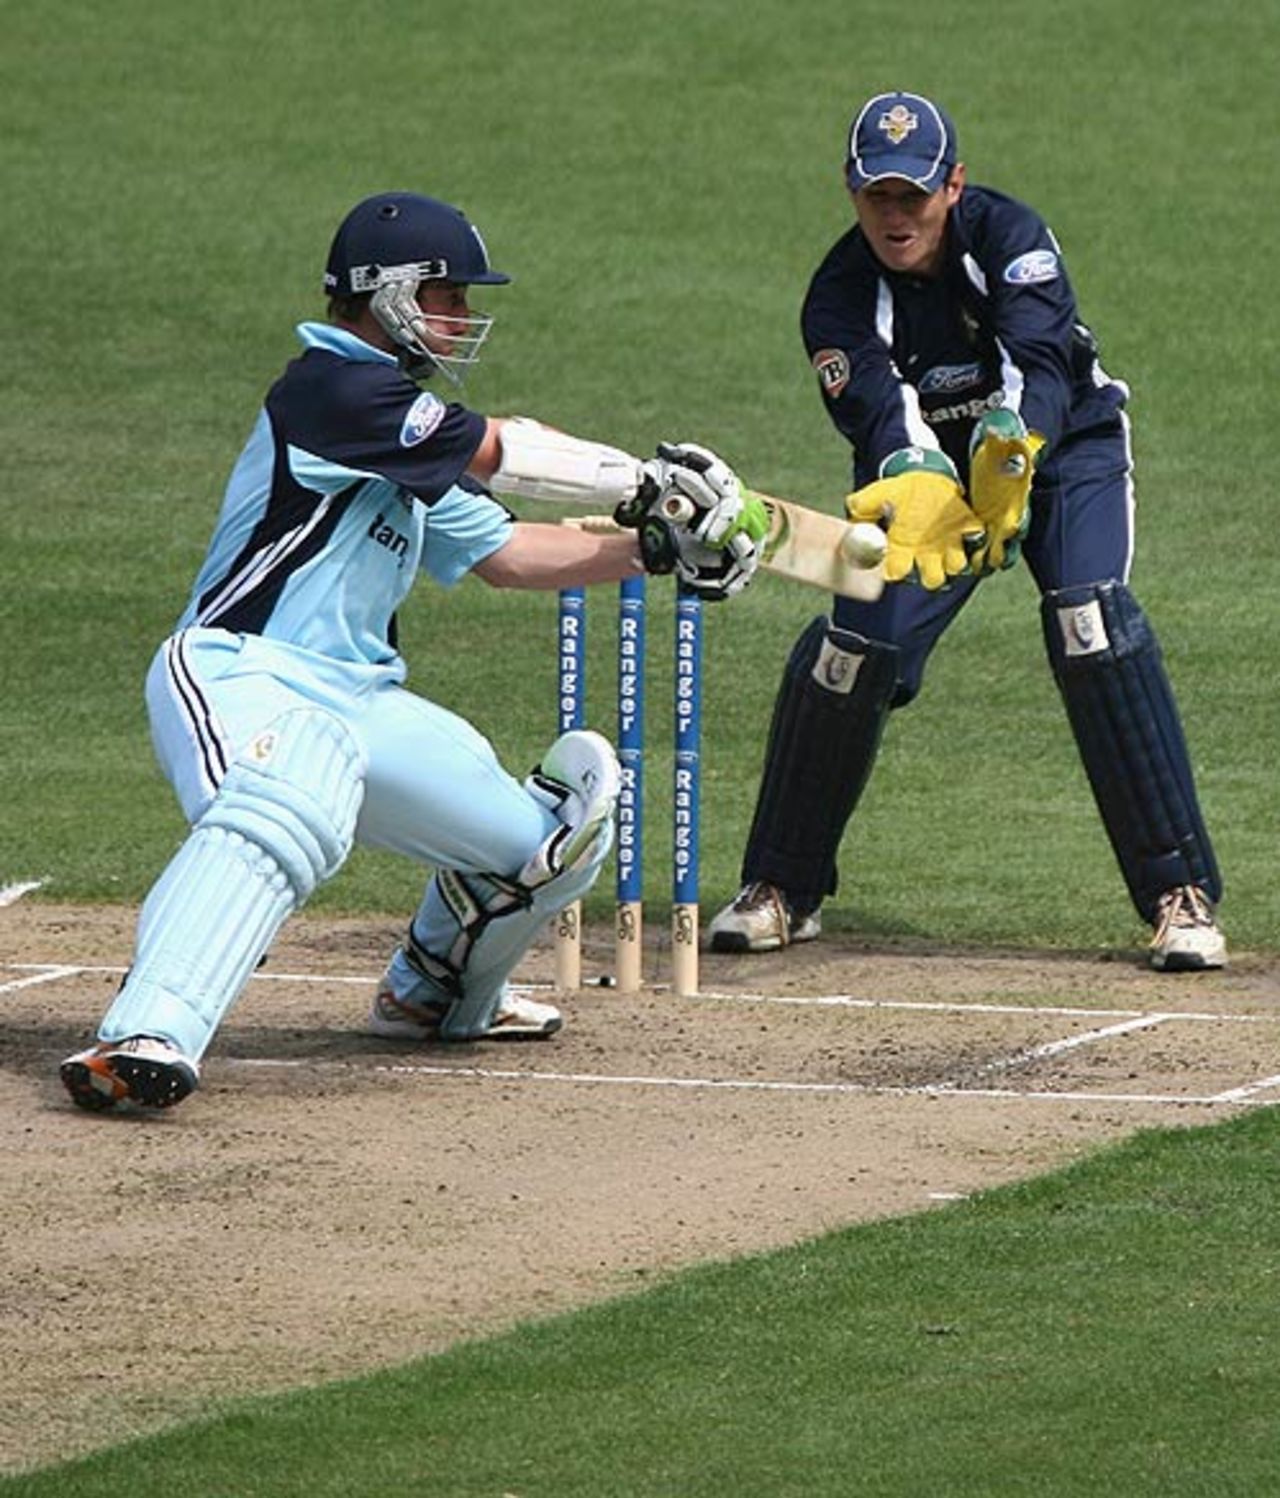 Phillip Hughes late cuts on his way to 68 on debut, Victoria v New South Wales, FR Cup, Melbourne, November 28, 2007